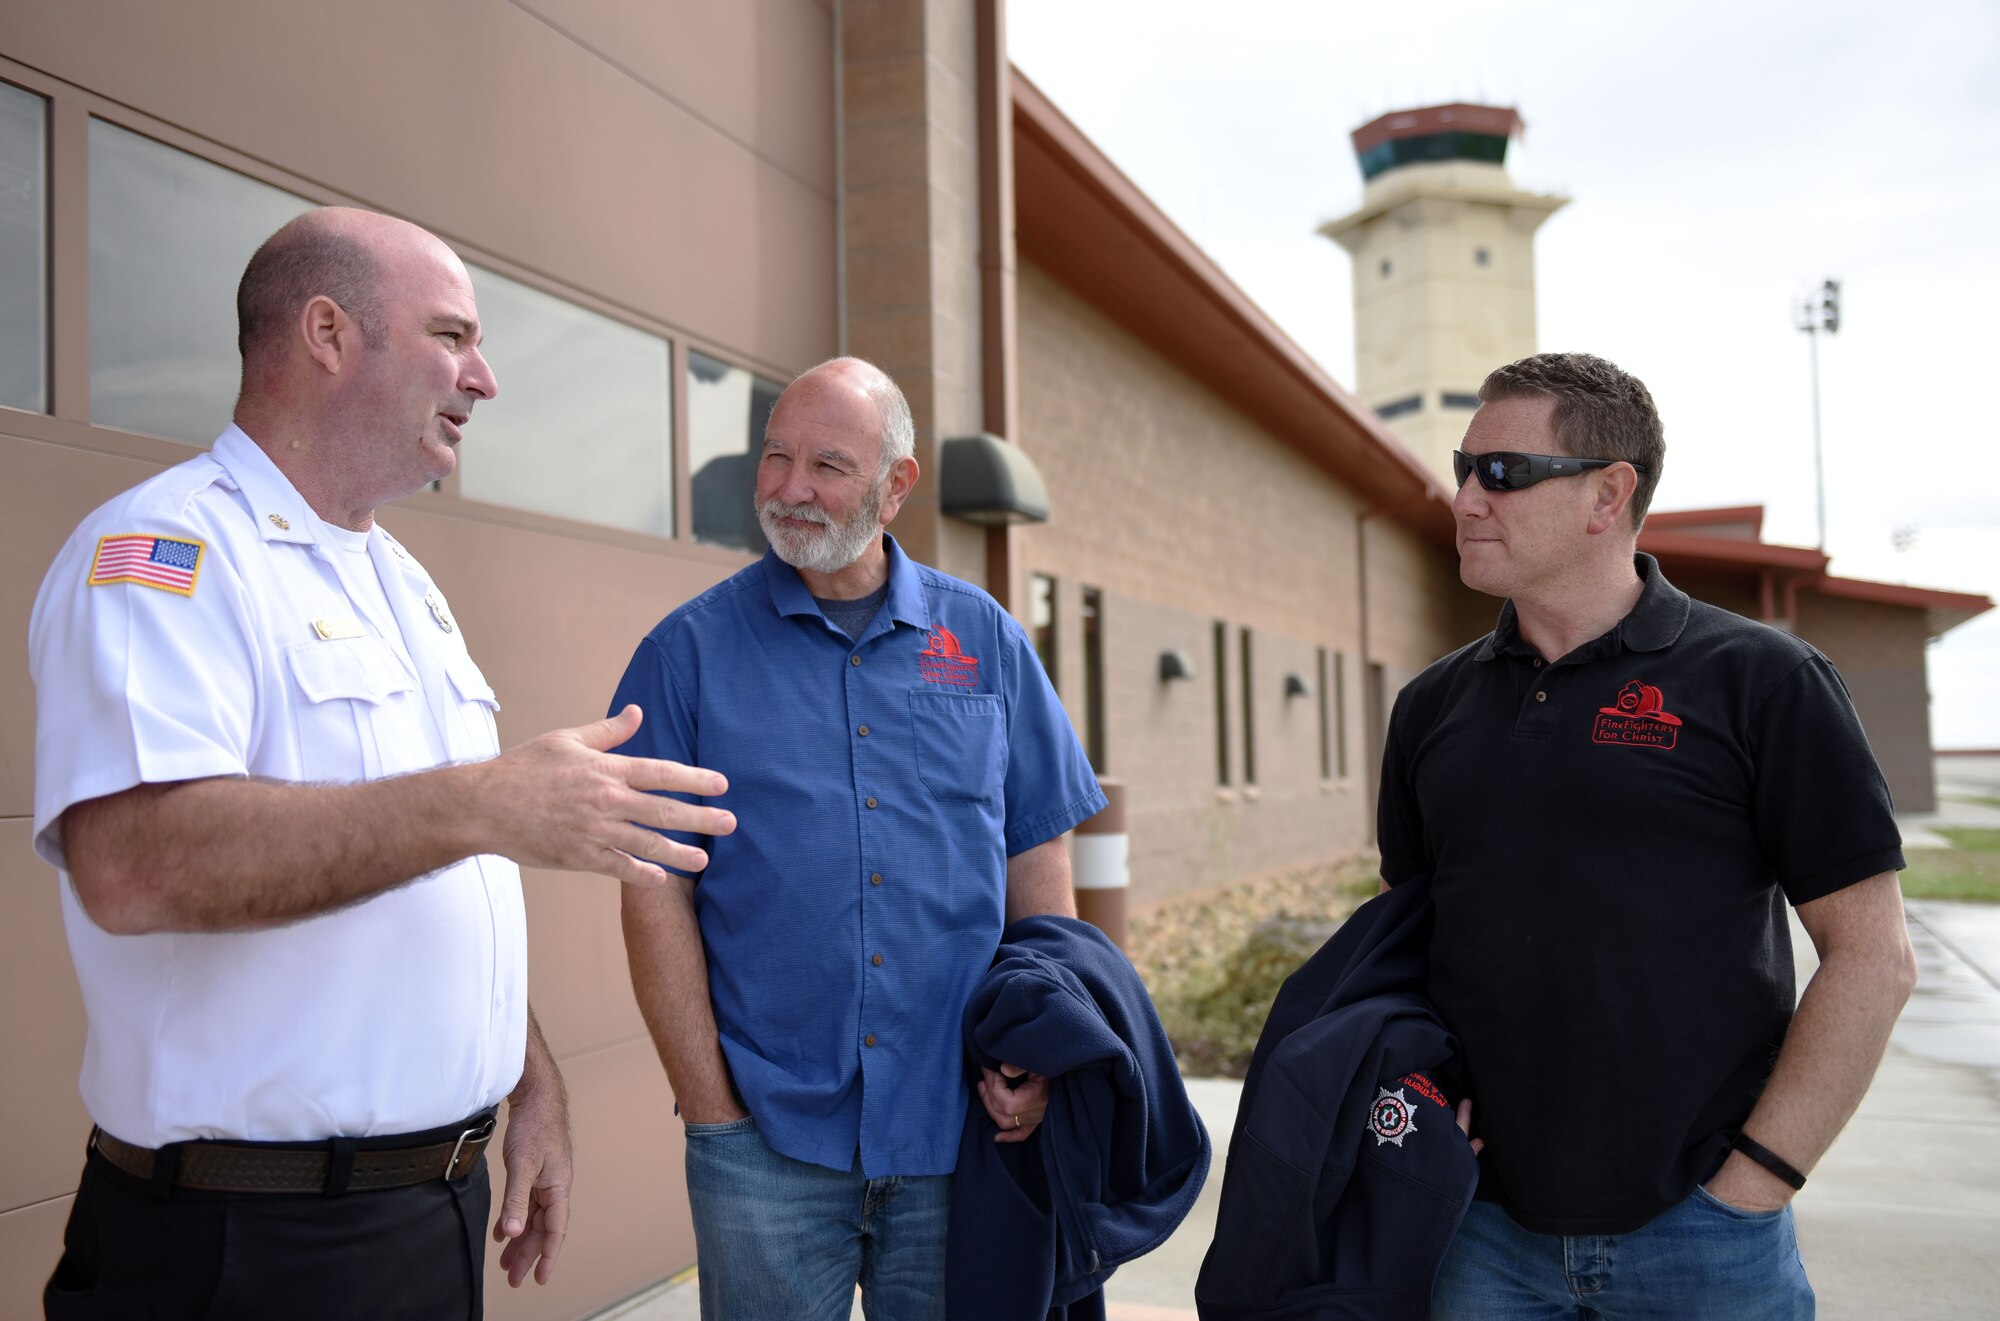 John Speakman, Travis Fire Emergency Services chief, left, stands with Steve Vucrevich, chapter leader for North Bay Firefighters for Christ, center, and Owen Spiers, a Belfast firefighter and Northern Ireland FFC representative, during a meet and greet session April 11 at Travis Air Force Base, Calif. Speakman has led efforts in the past to contribute Travis' FFC chapter to help in various charitable causes in the local community (U.S. Air Force photo by Airman 1st Class Christian Conrad)